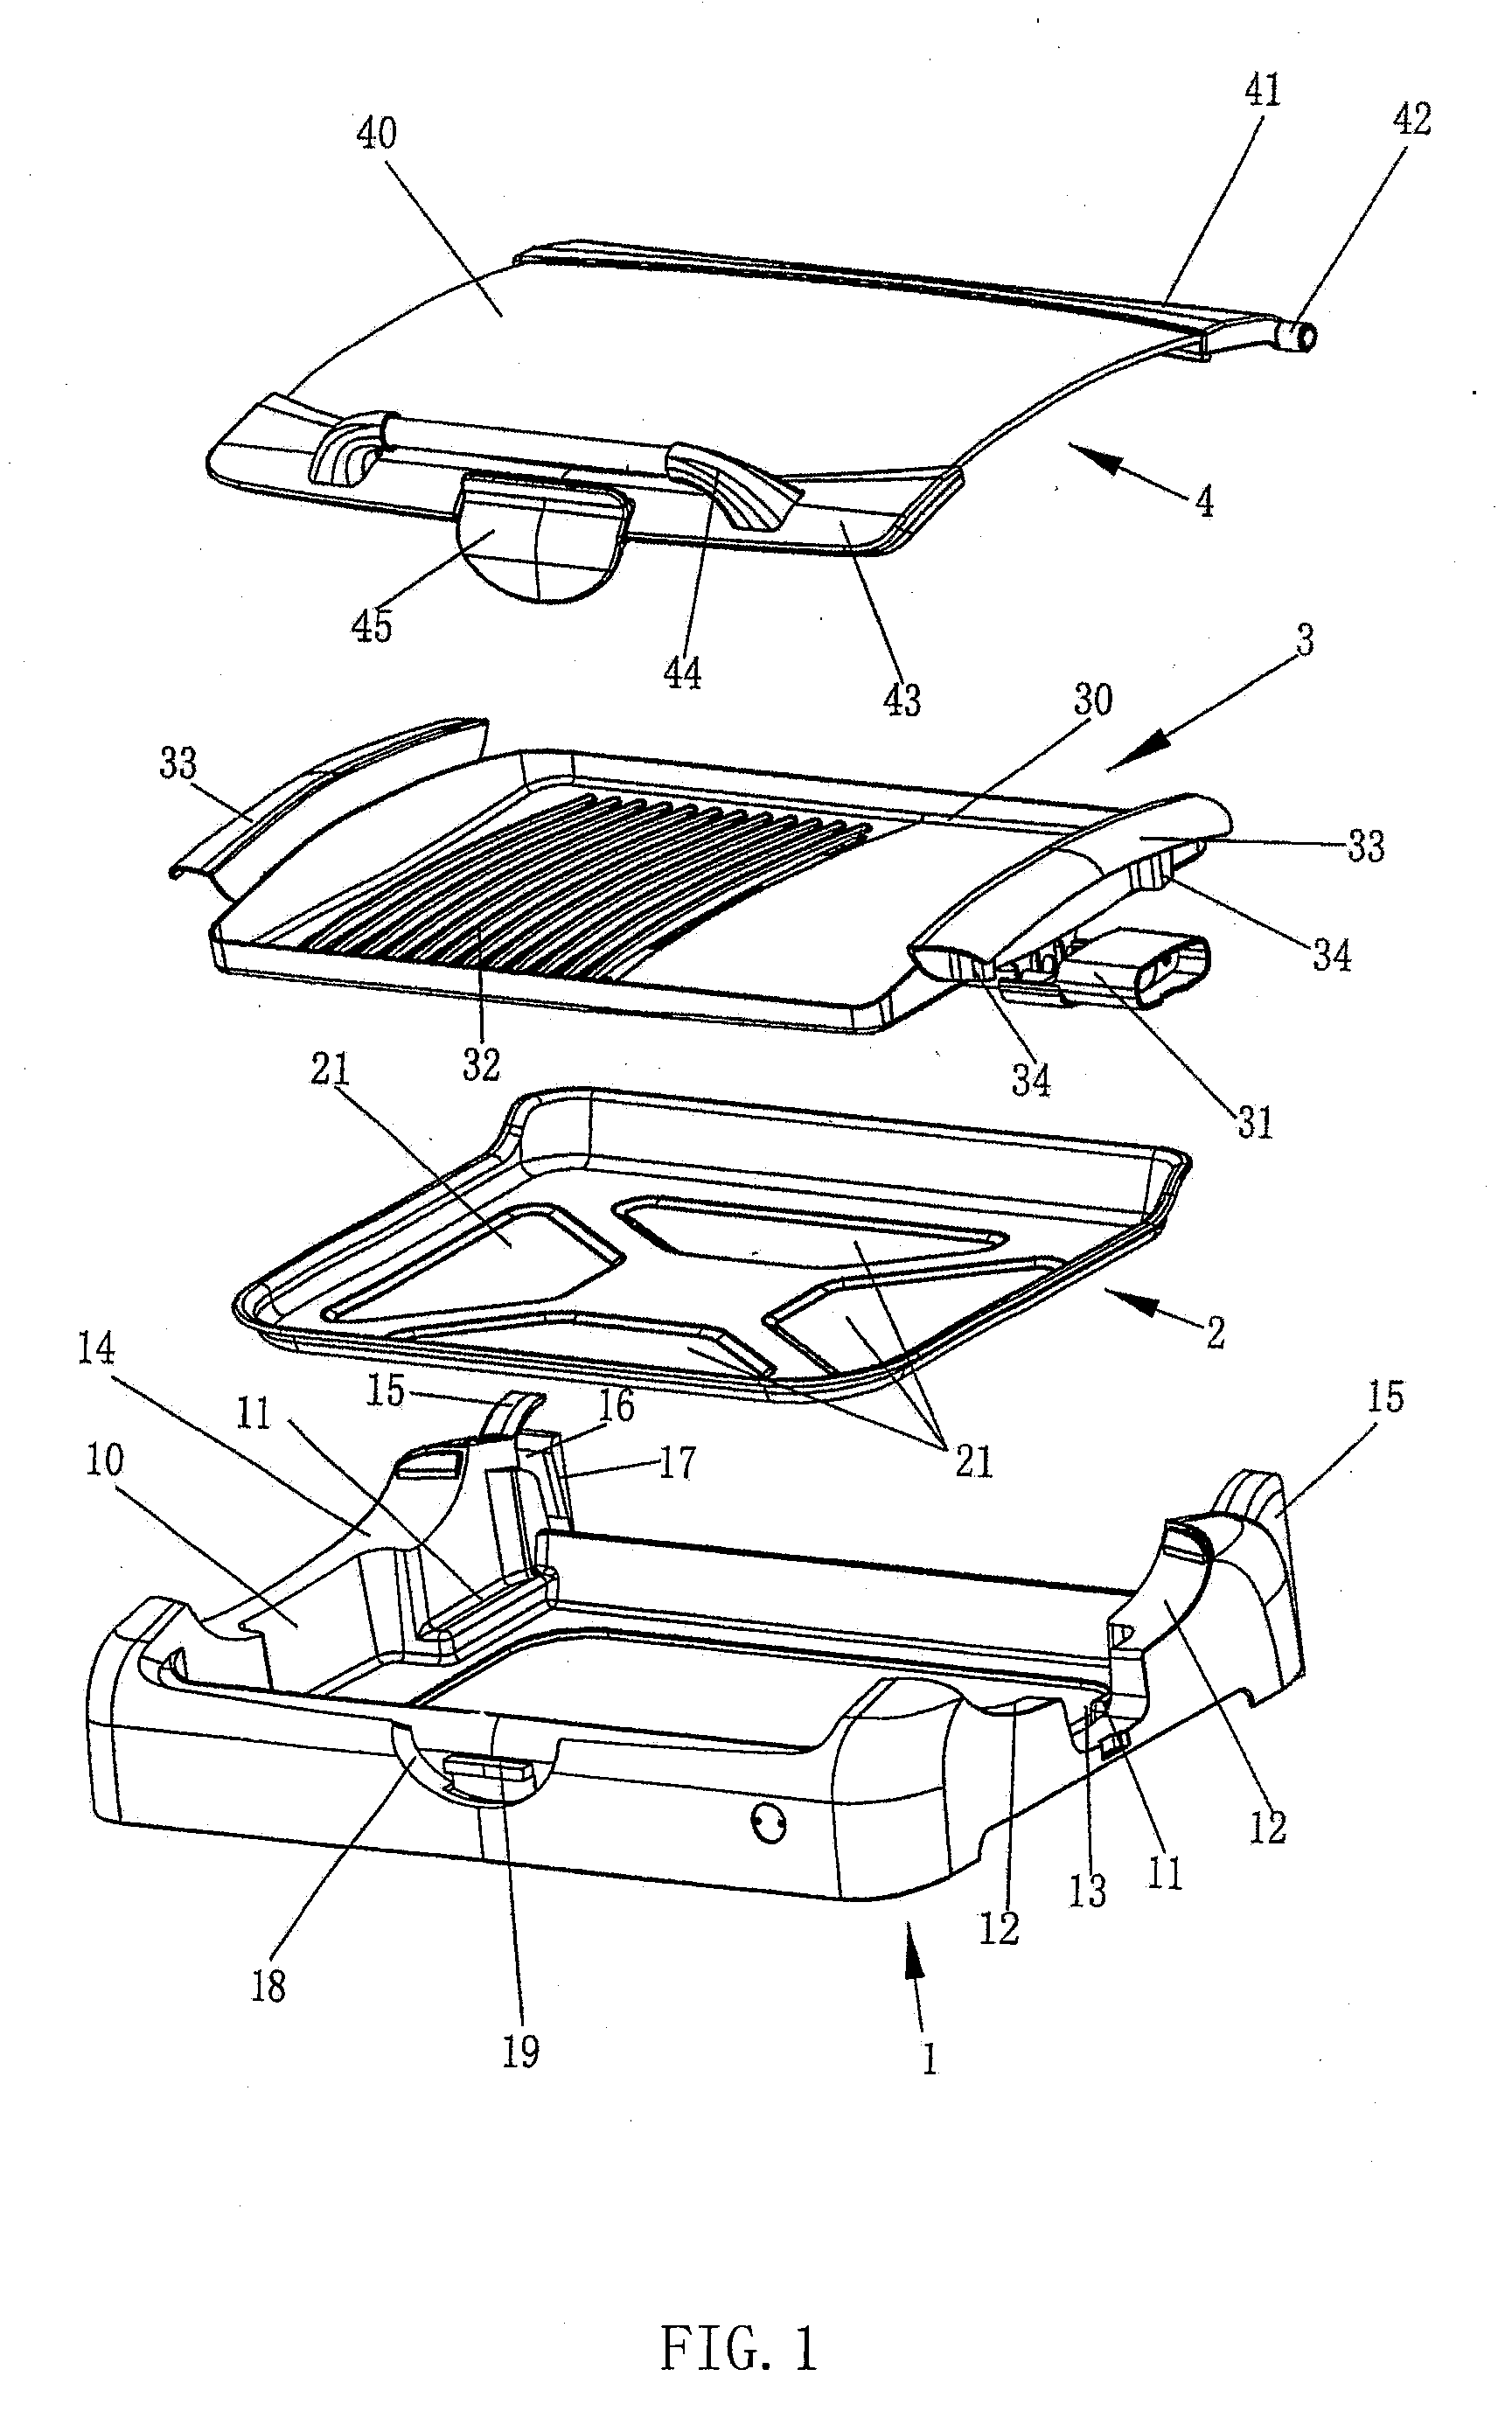 Lifting-cover type frying-roasting device